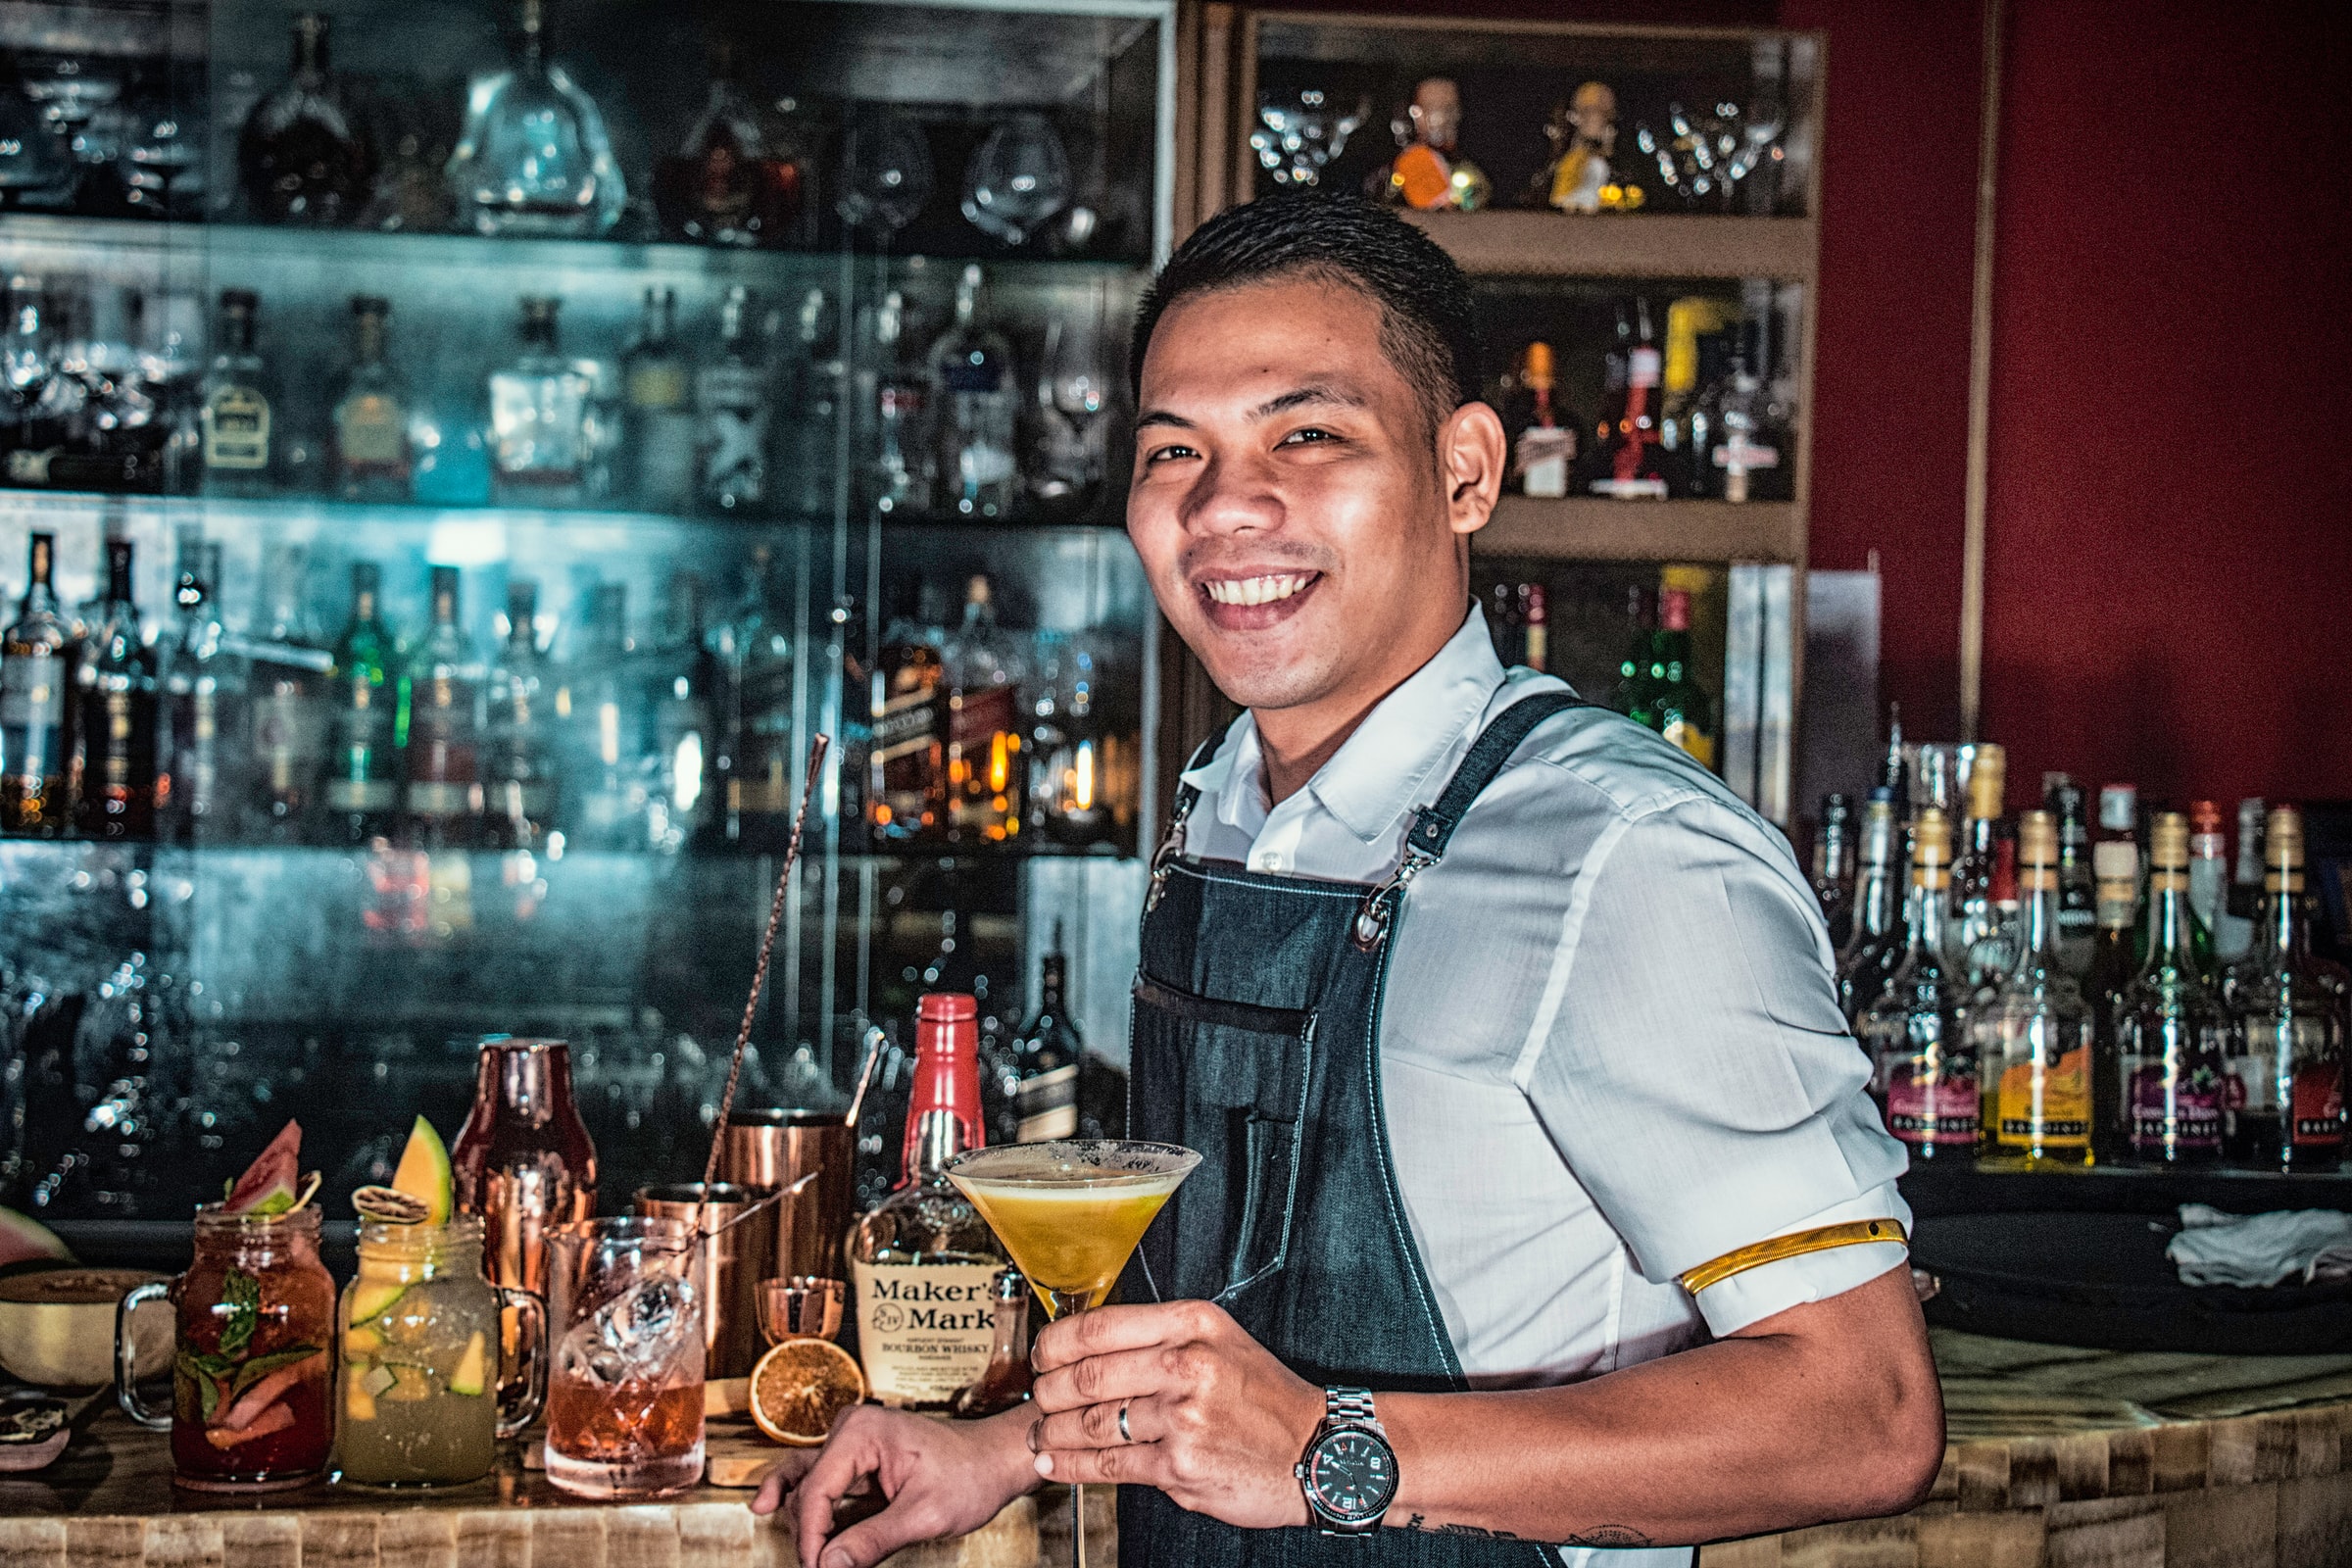 A bartender smiles, showing one of the most important factors when hiring a bartender: a friendly personality!